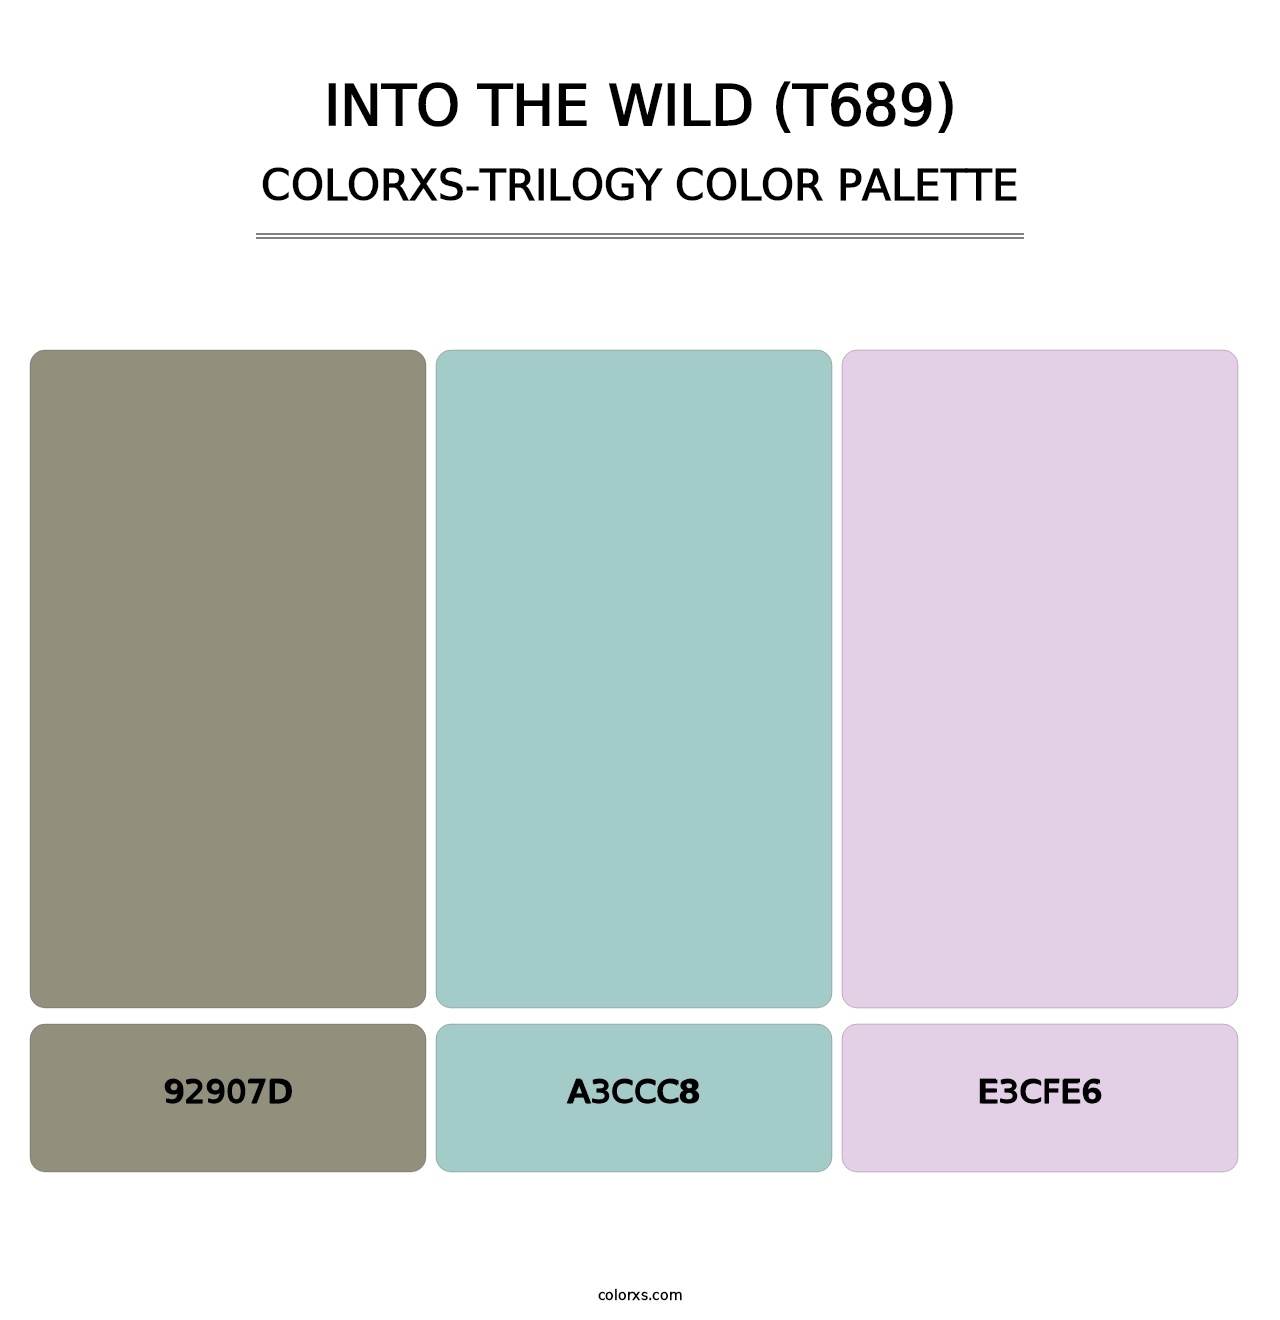 Into the Wild (T689) - Colorxs Trilogy Palette